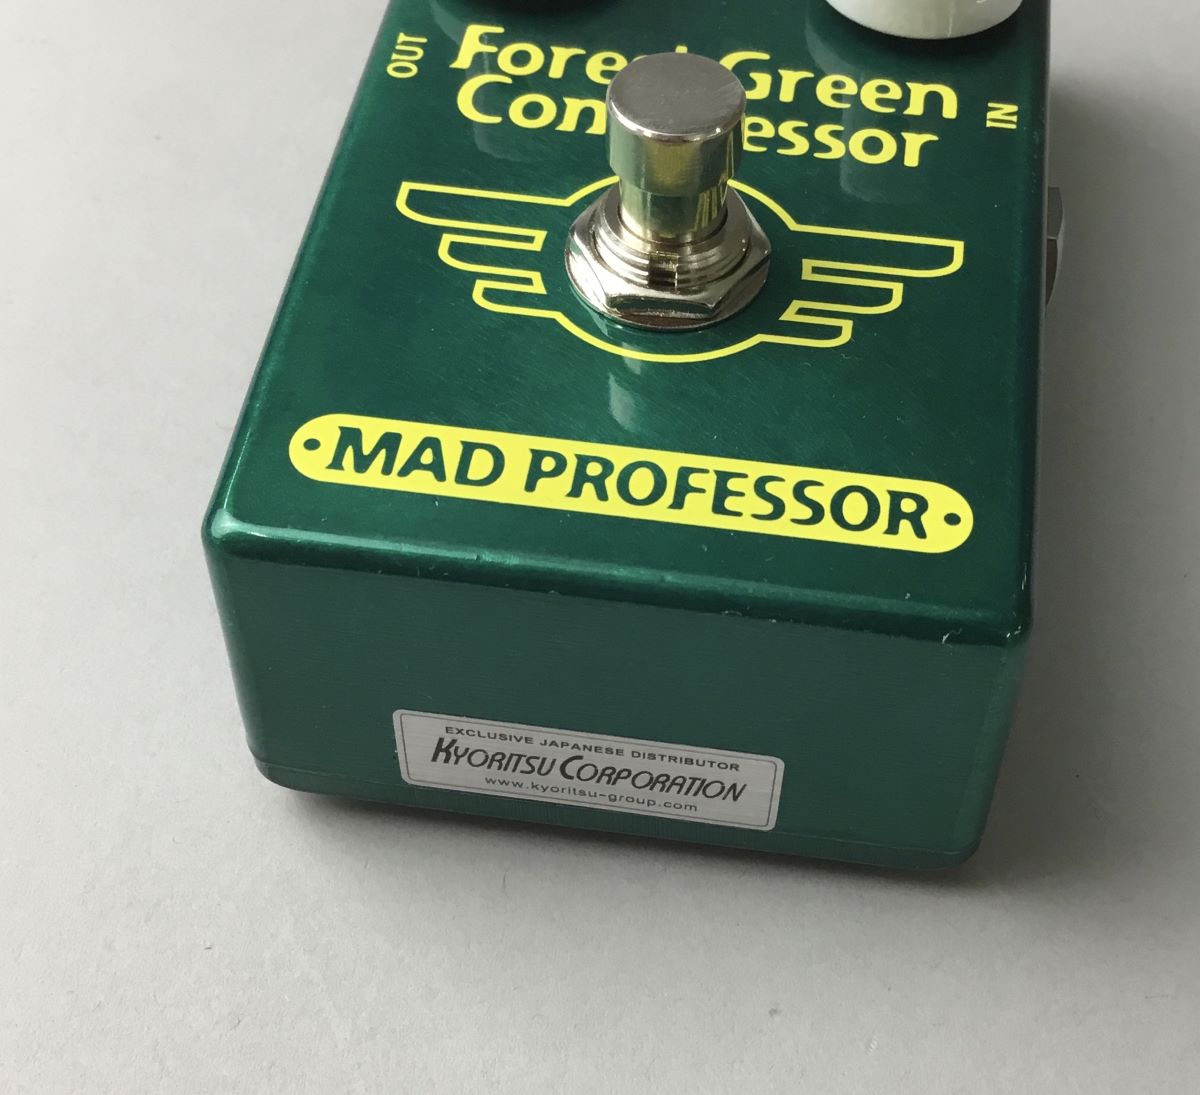 Mad Professor New Forest Green Compressor コンパクトエフェクター ...